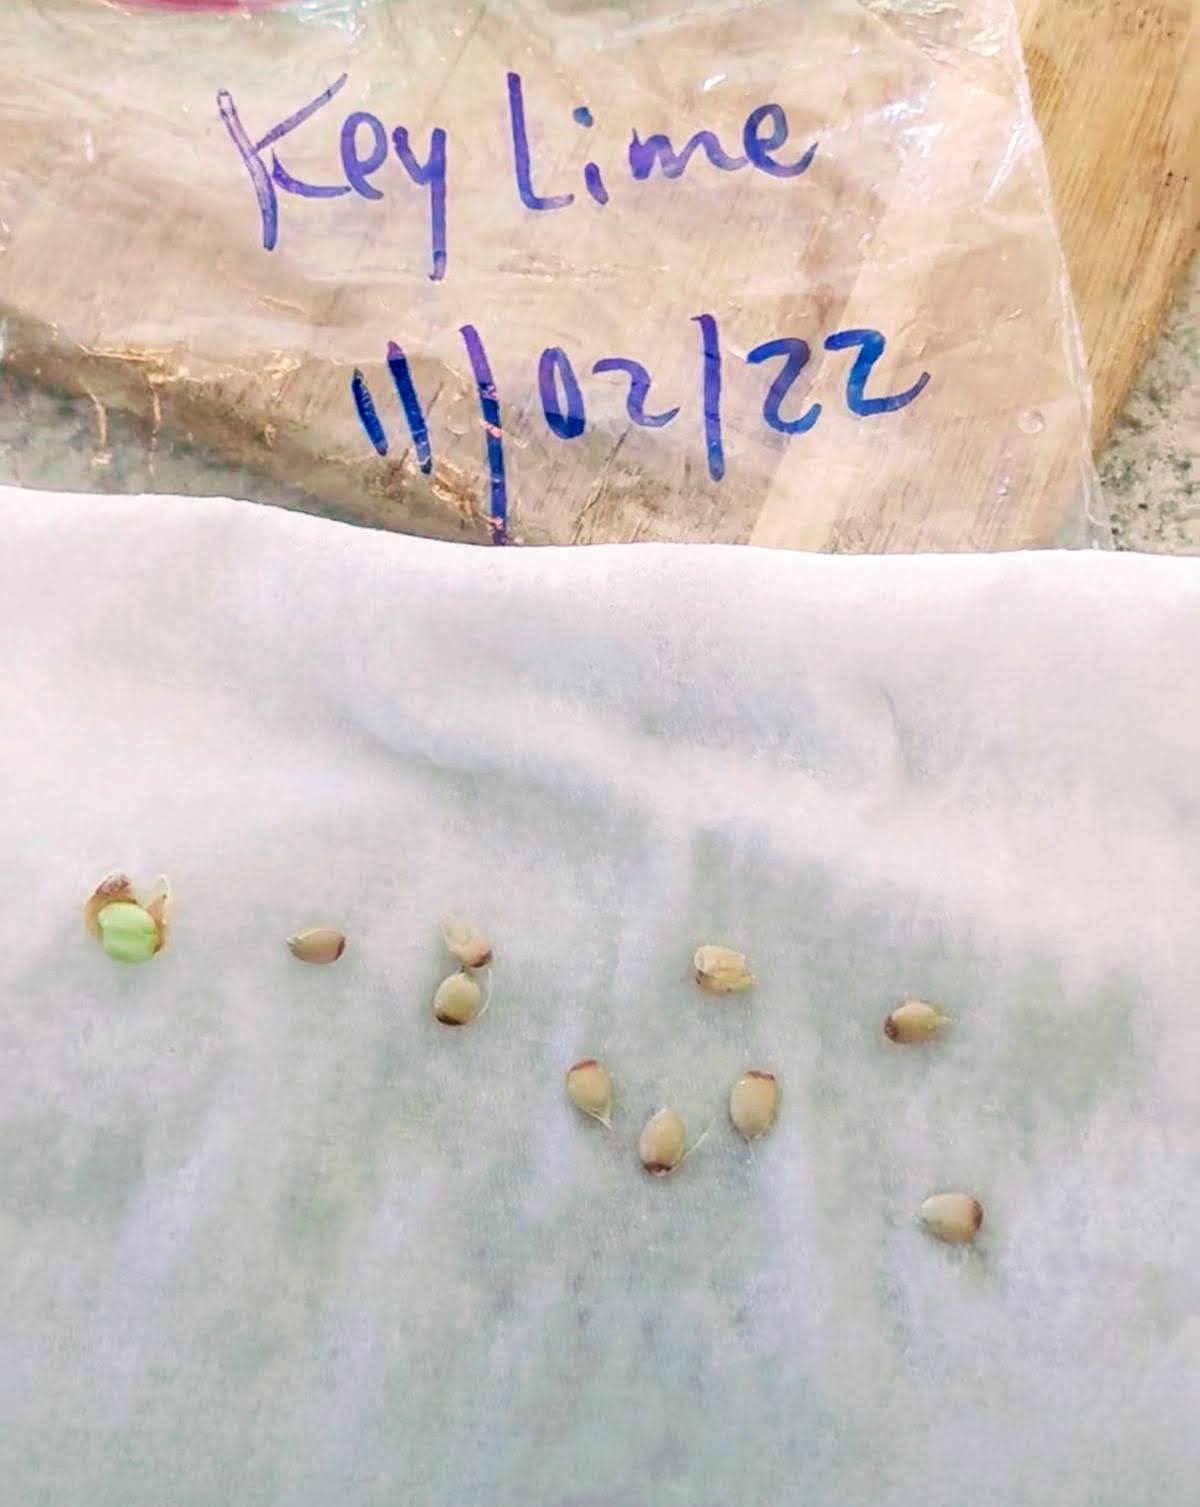 Key lime seeds and baggie for germination